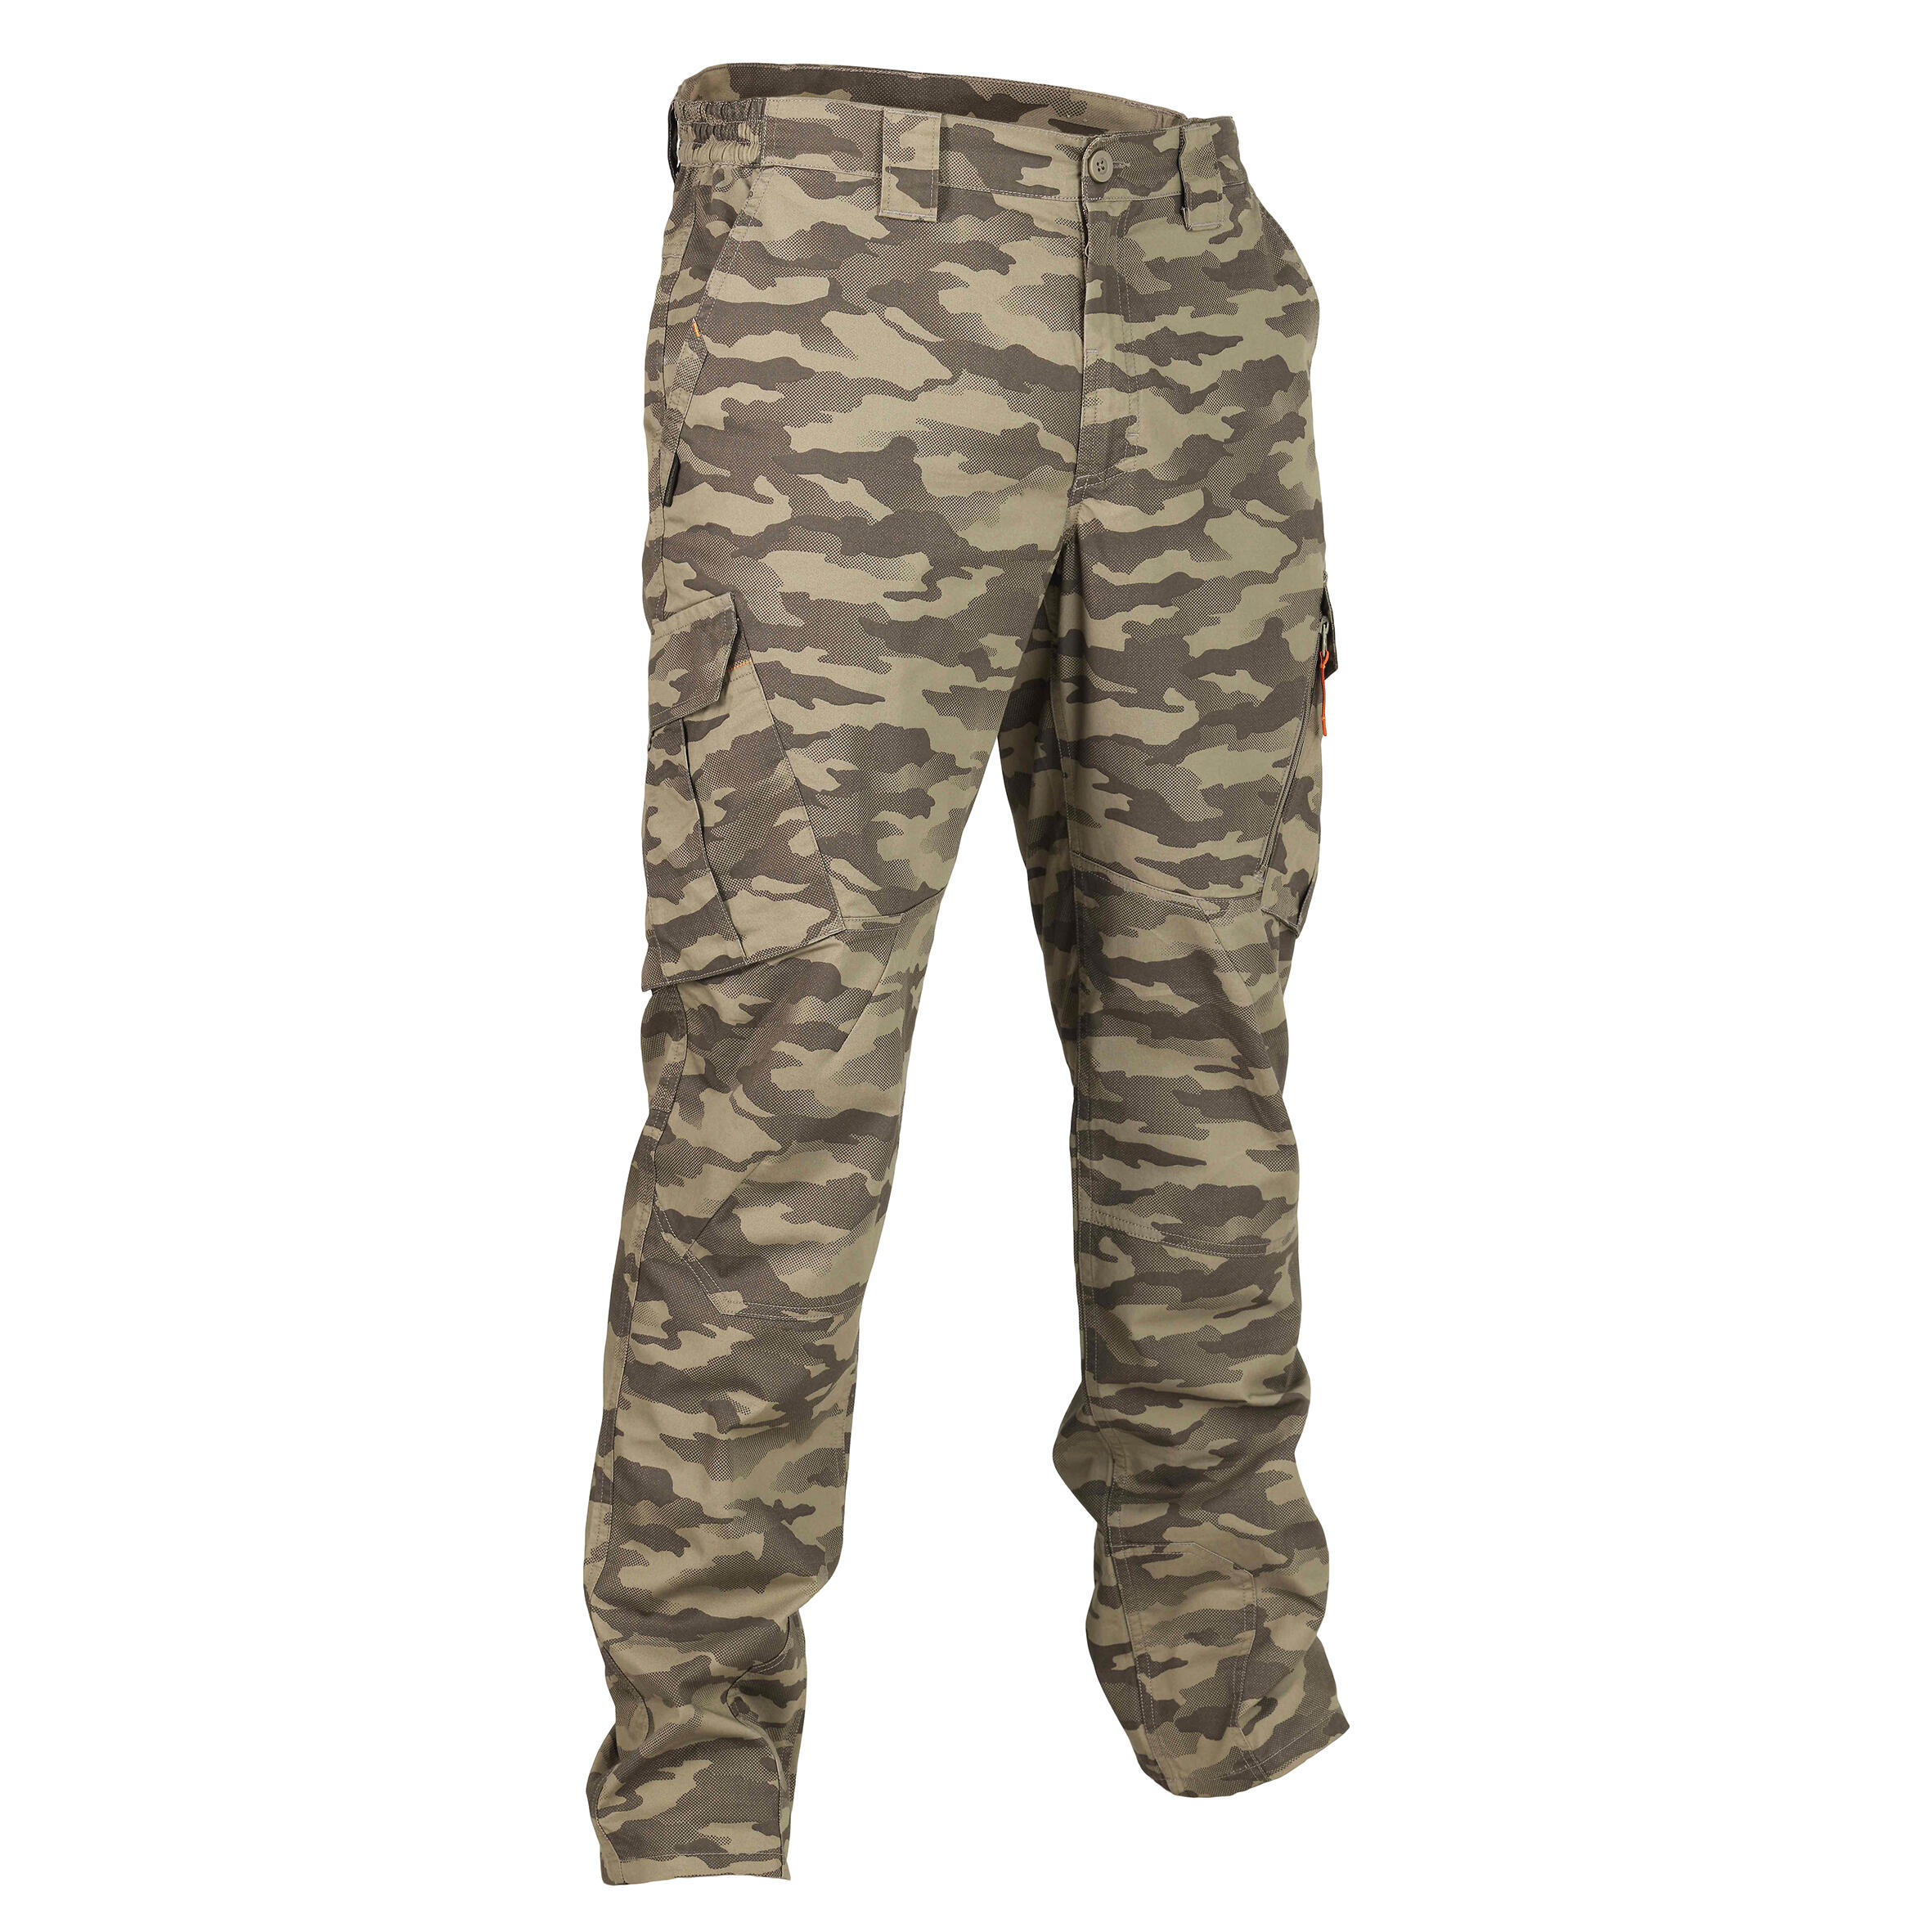 Fashion (Army Camo)Camouflage Cargo Pants Men Casual Military Army Style  Pants Tactical Side Zipper Pocket Cotton Loose Baggy Trousers Plus Size OM  @ Best Price Online | Jumia Kenya